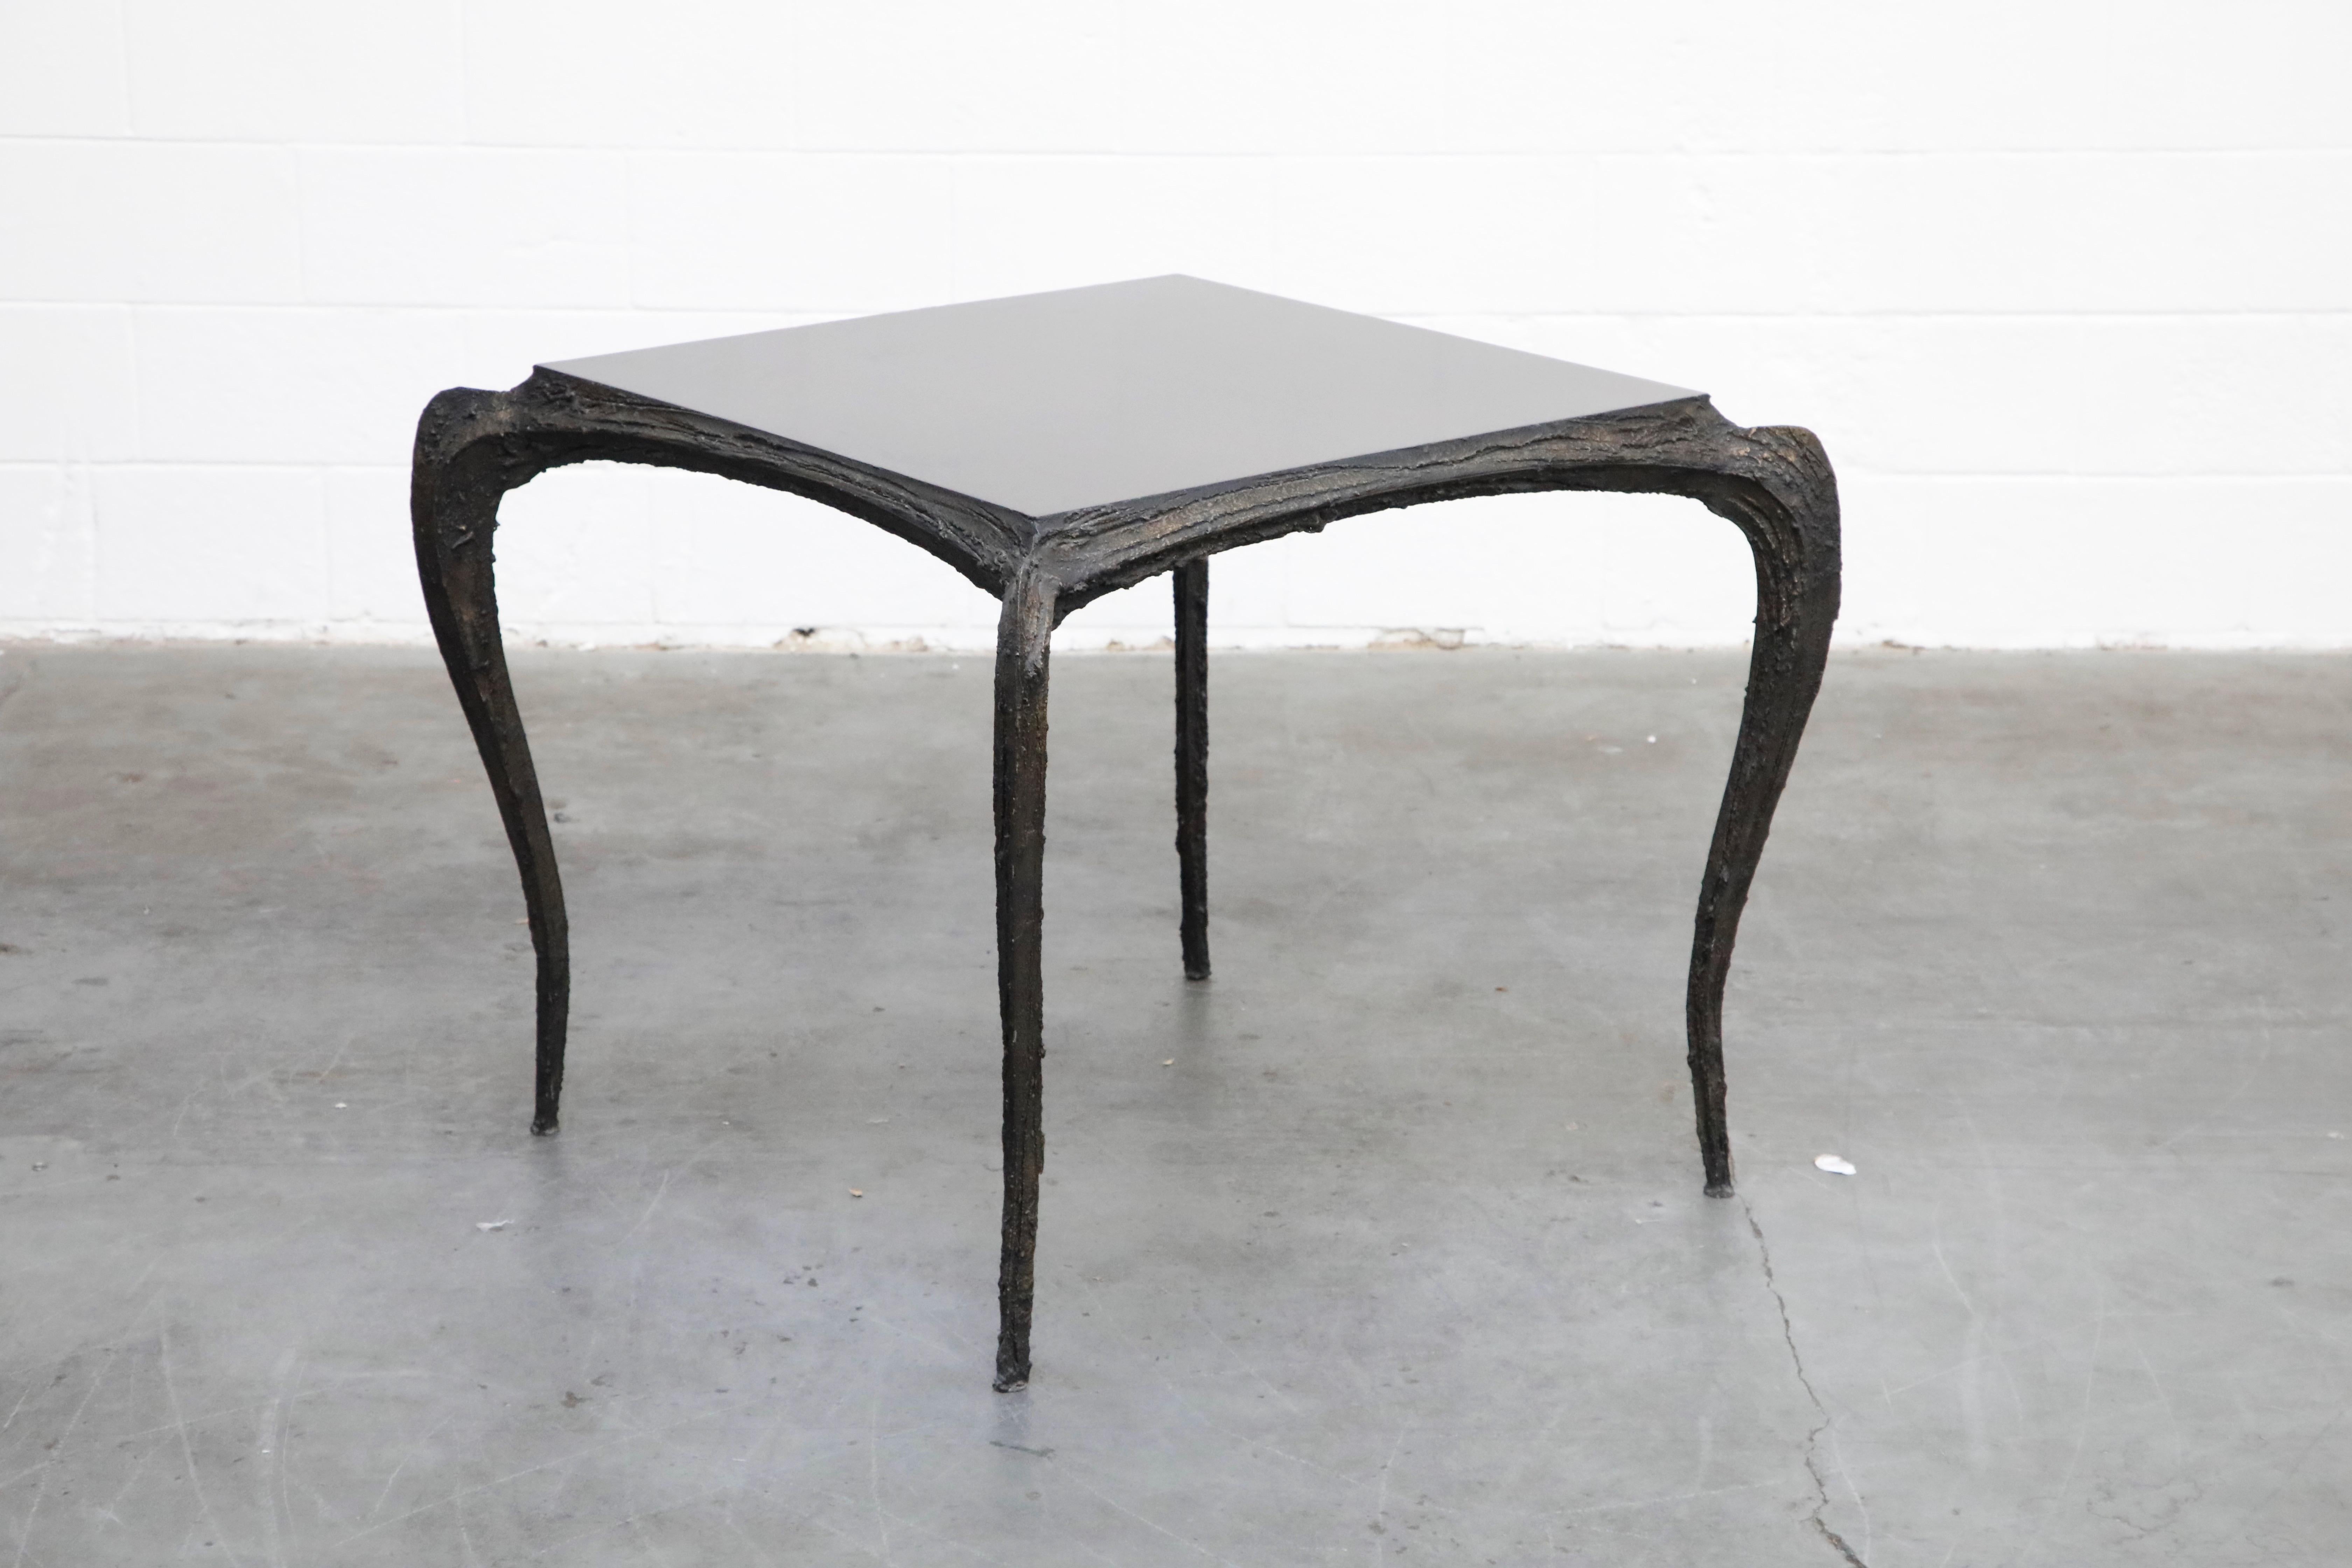 A stunning and incredibly rare Model PE-114 Paul Evans sculpted bronze cafe dining table (also works excellent as a game table or center table) which was part of the 